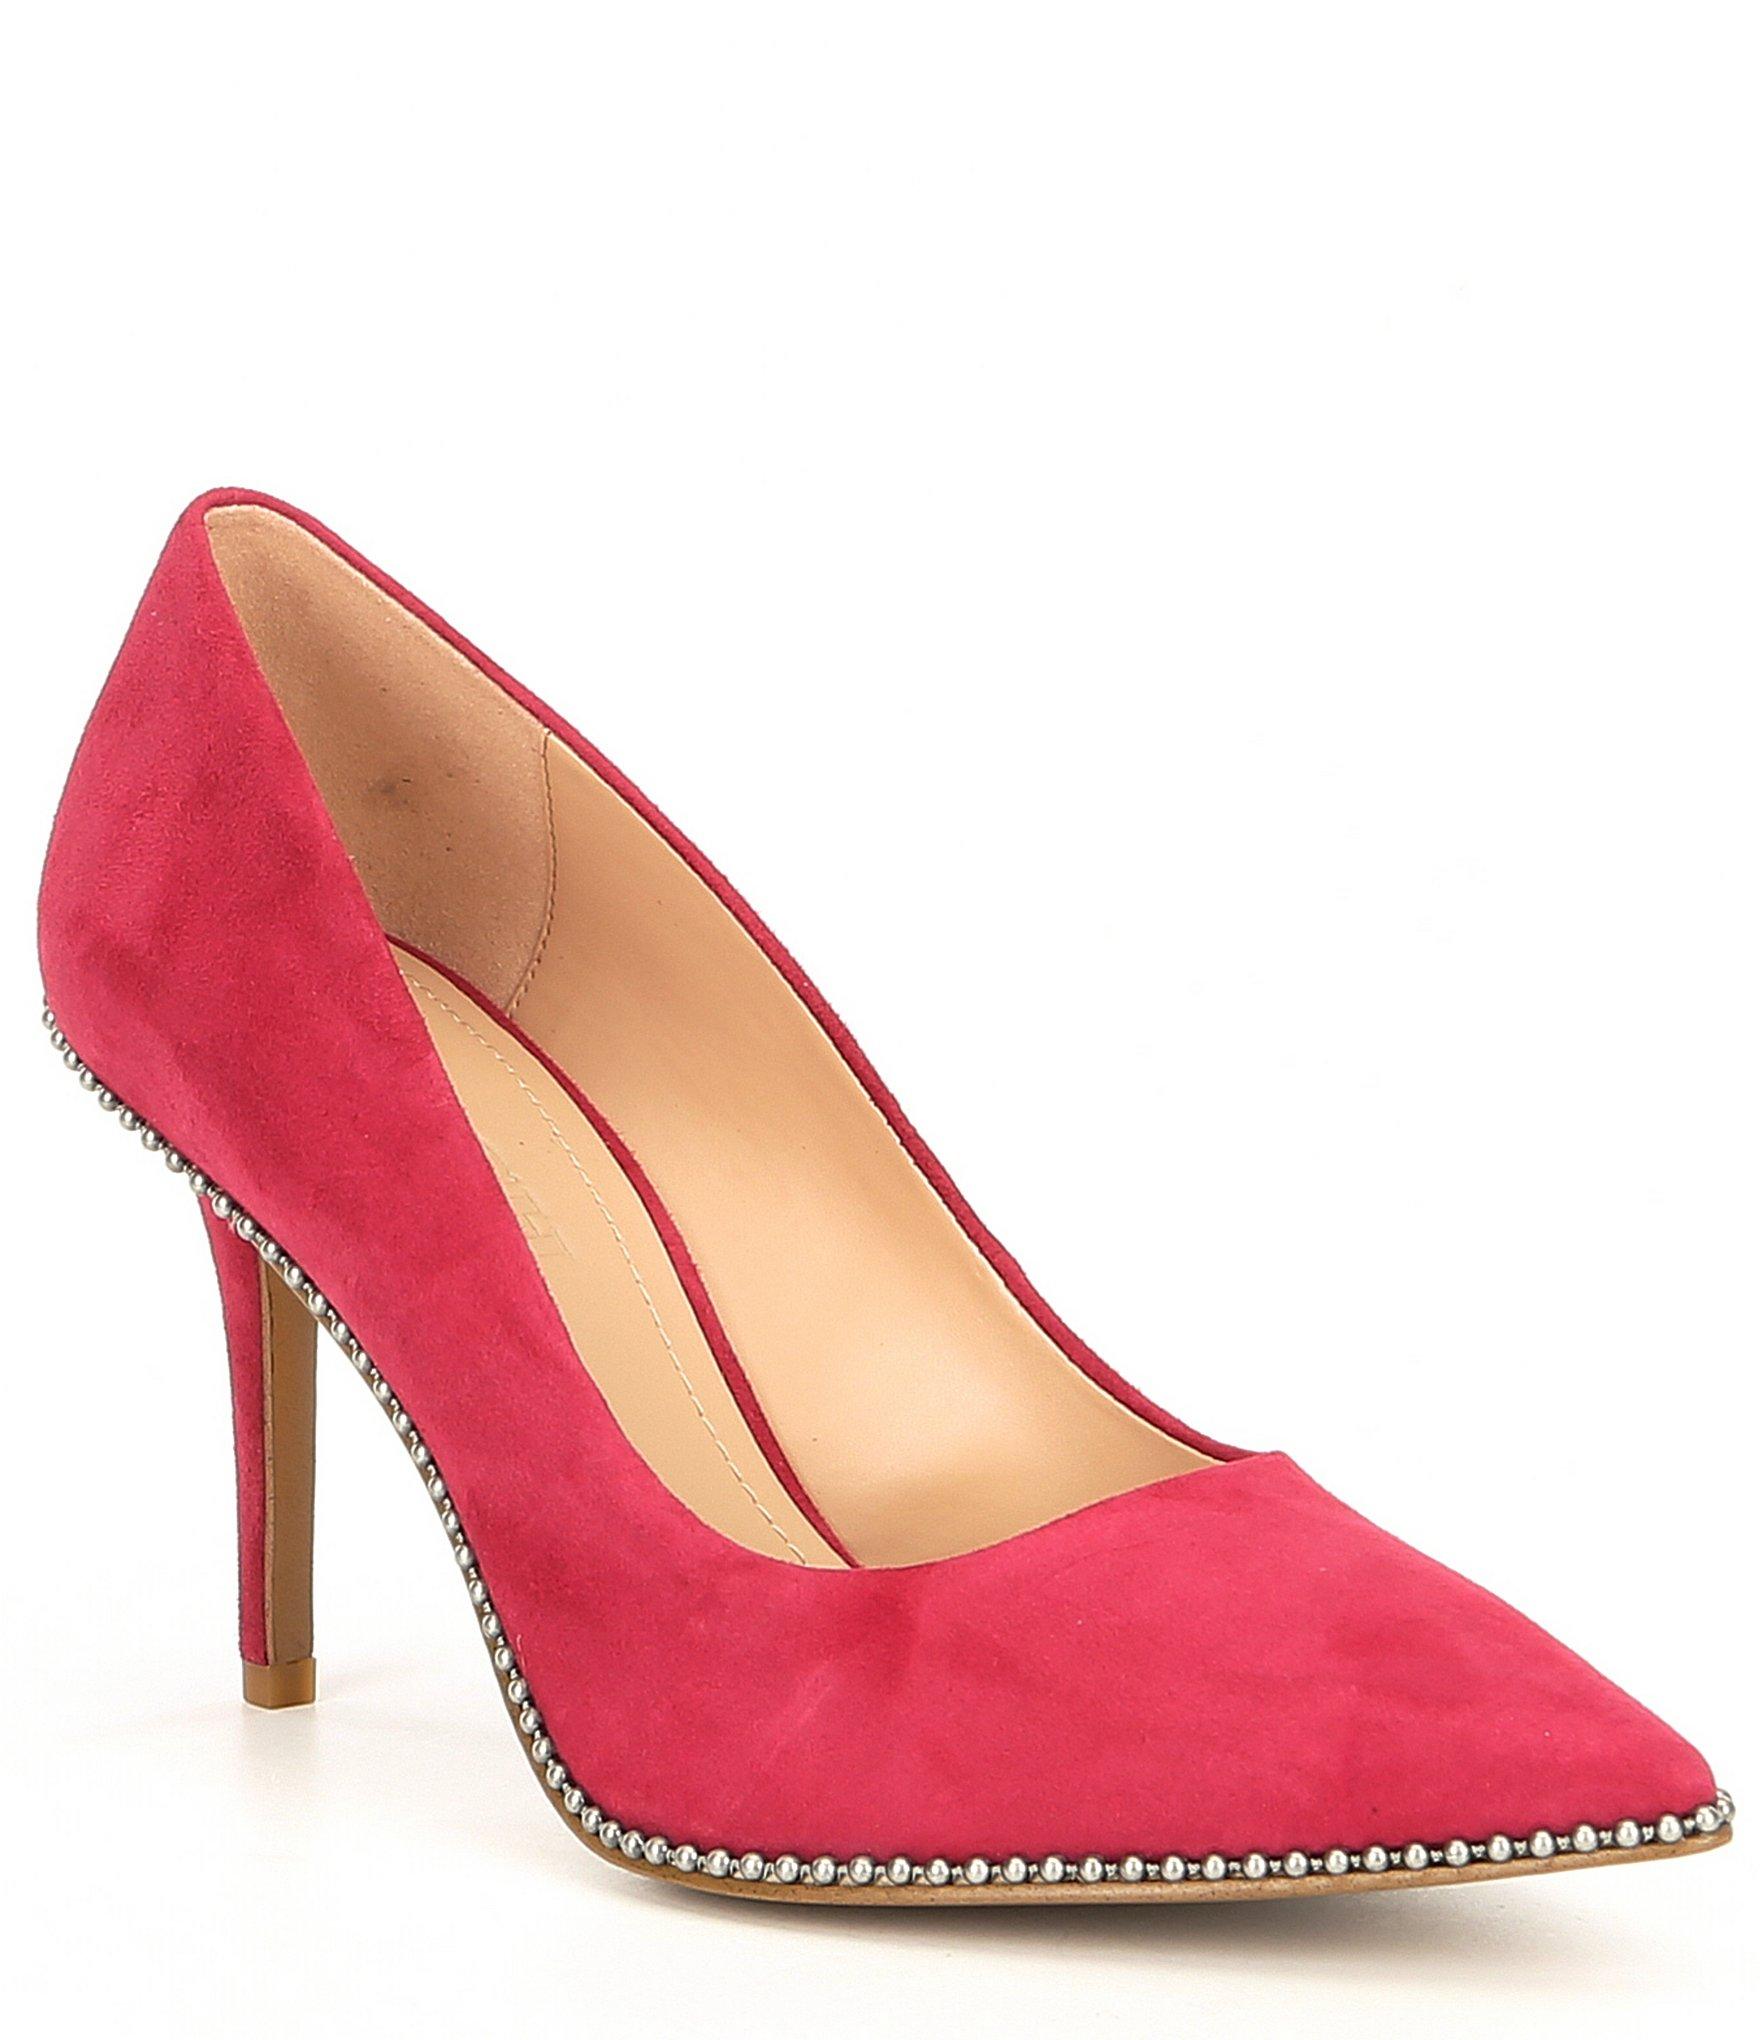 COACH Waverly Pointy Toe Pump in Red - Lyst